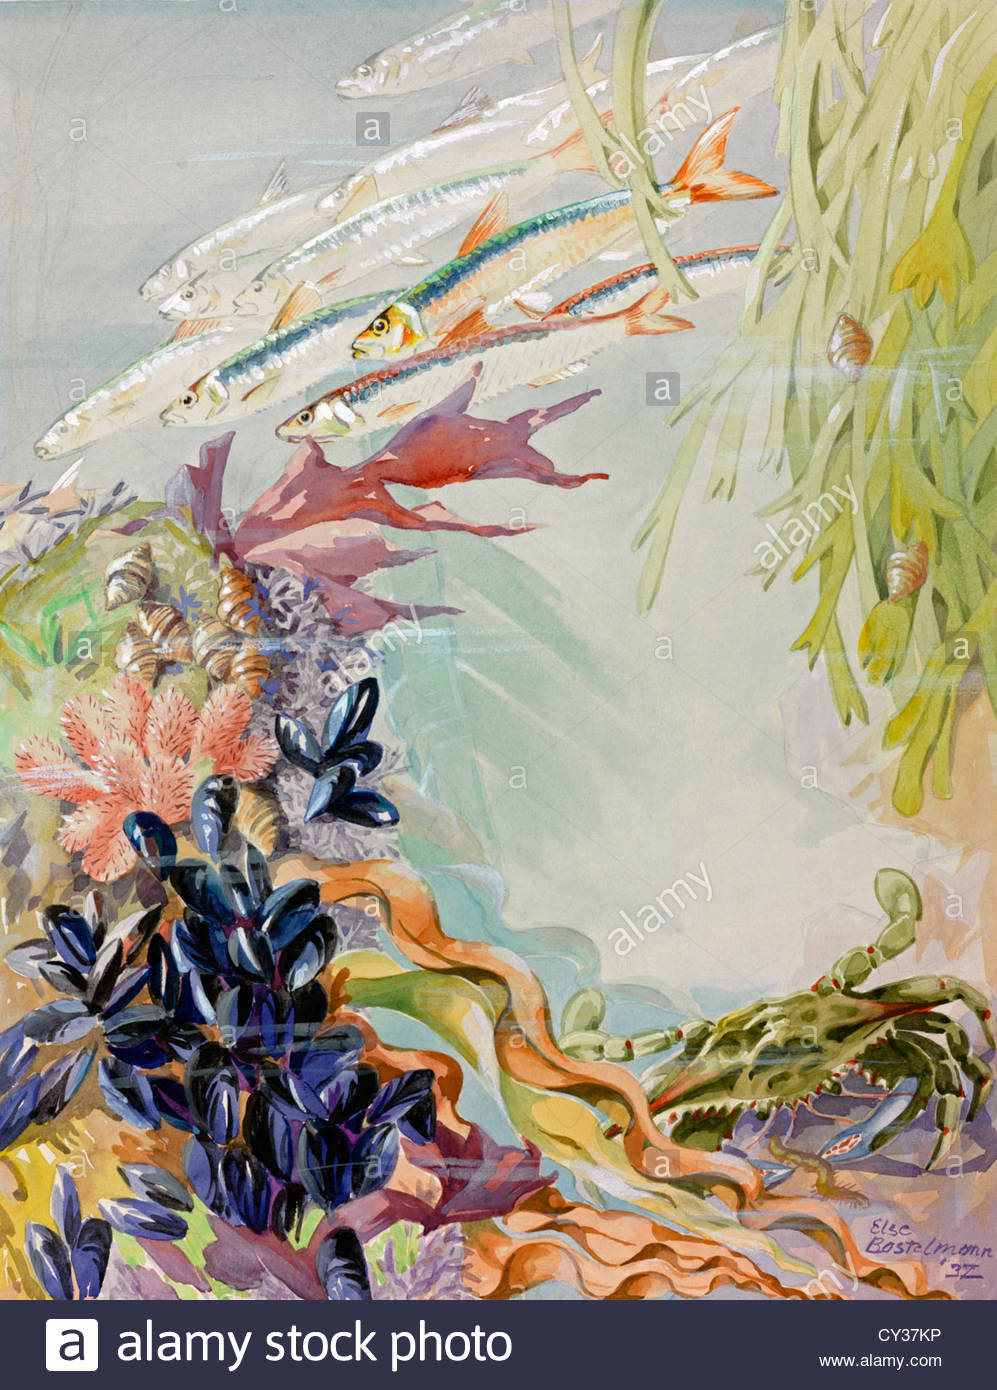 A Painting Of A Maine Sea Life Scene Surrounding A Sunken